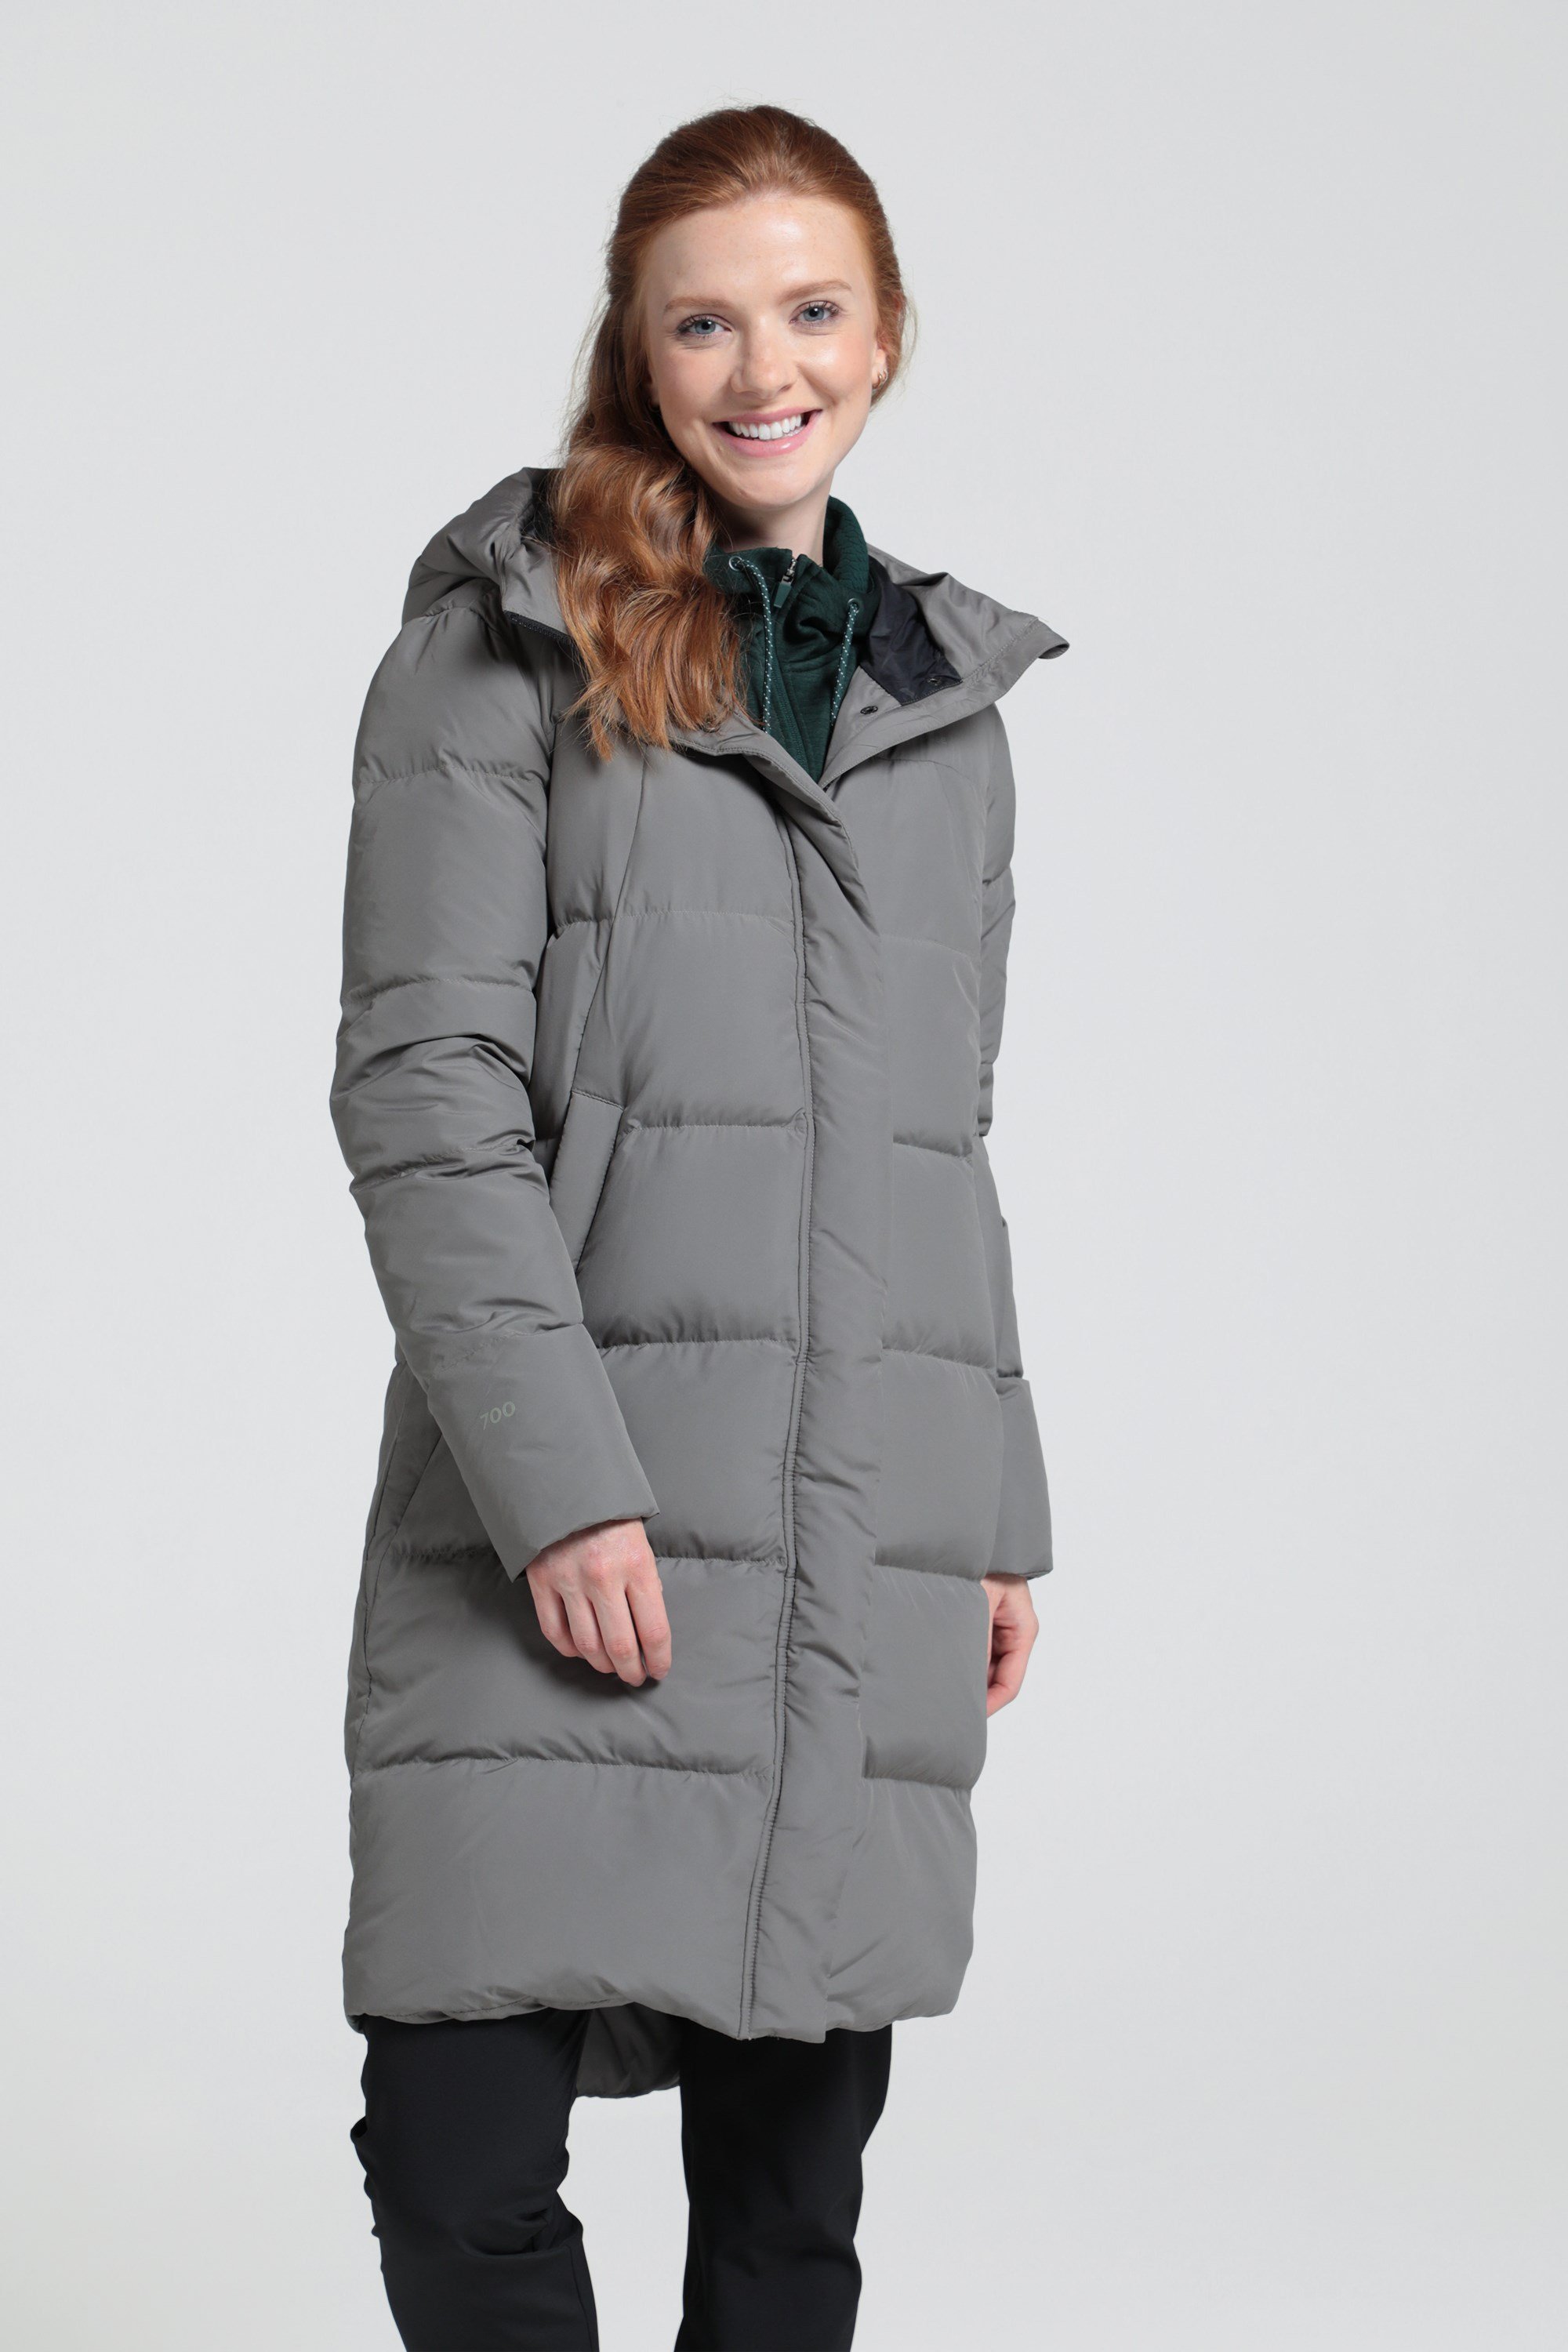 Andes Extreme Womens Long Down Jacket - Green